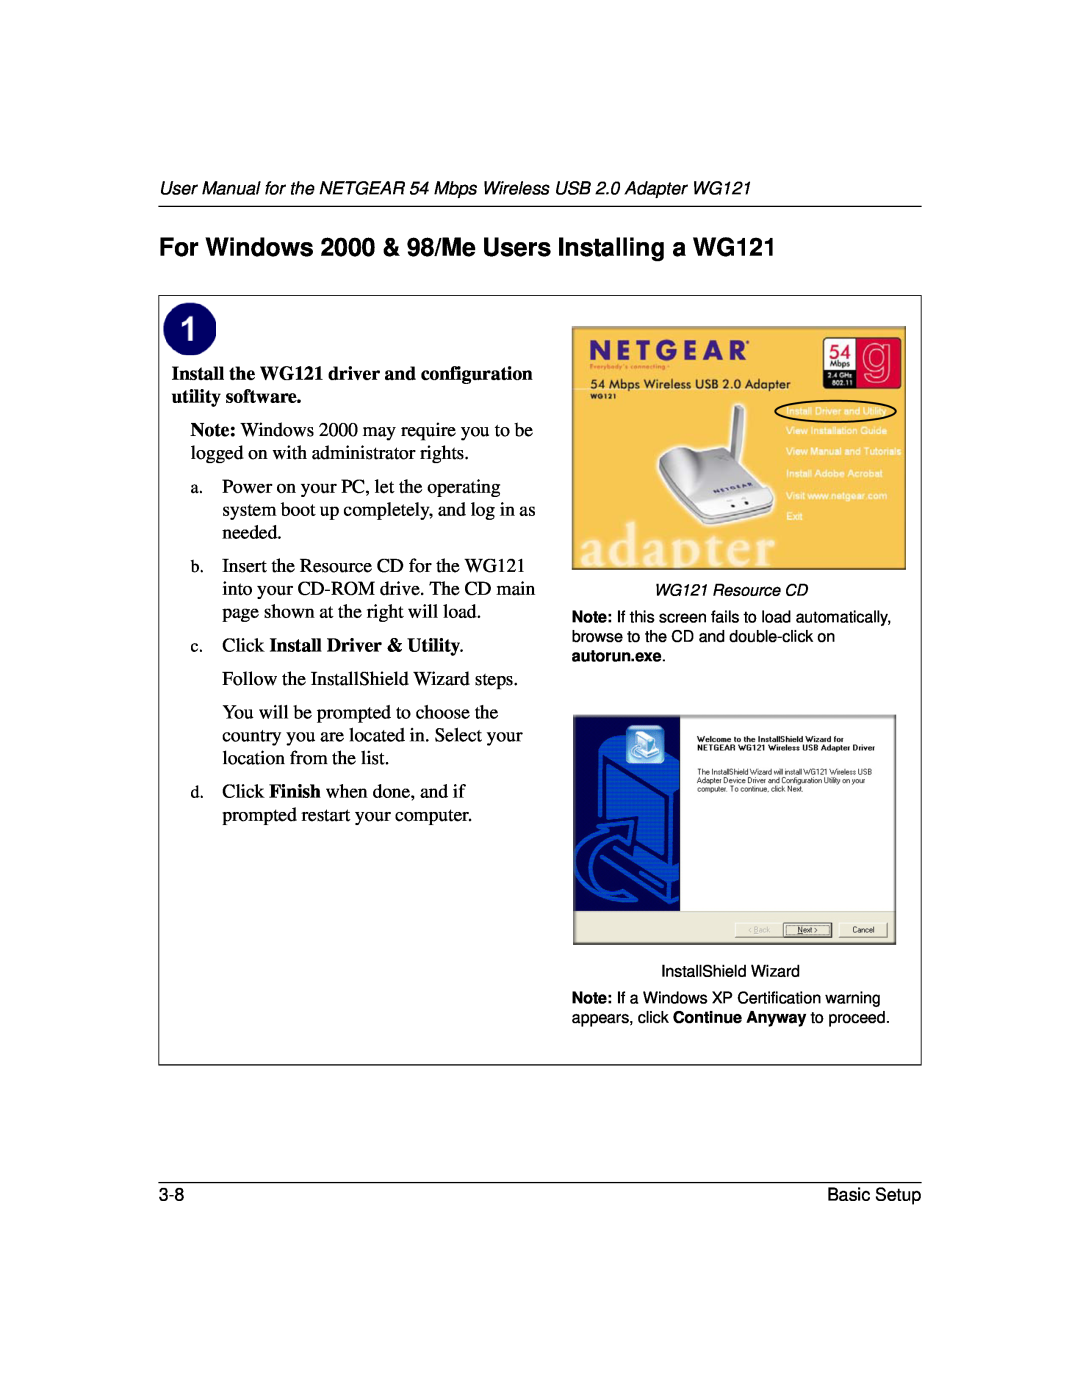 NETGEAR For Windows 2000 & 98/Me Users Installing a WG121, Install the WG121 driver and configuration utility software 